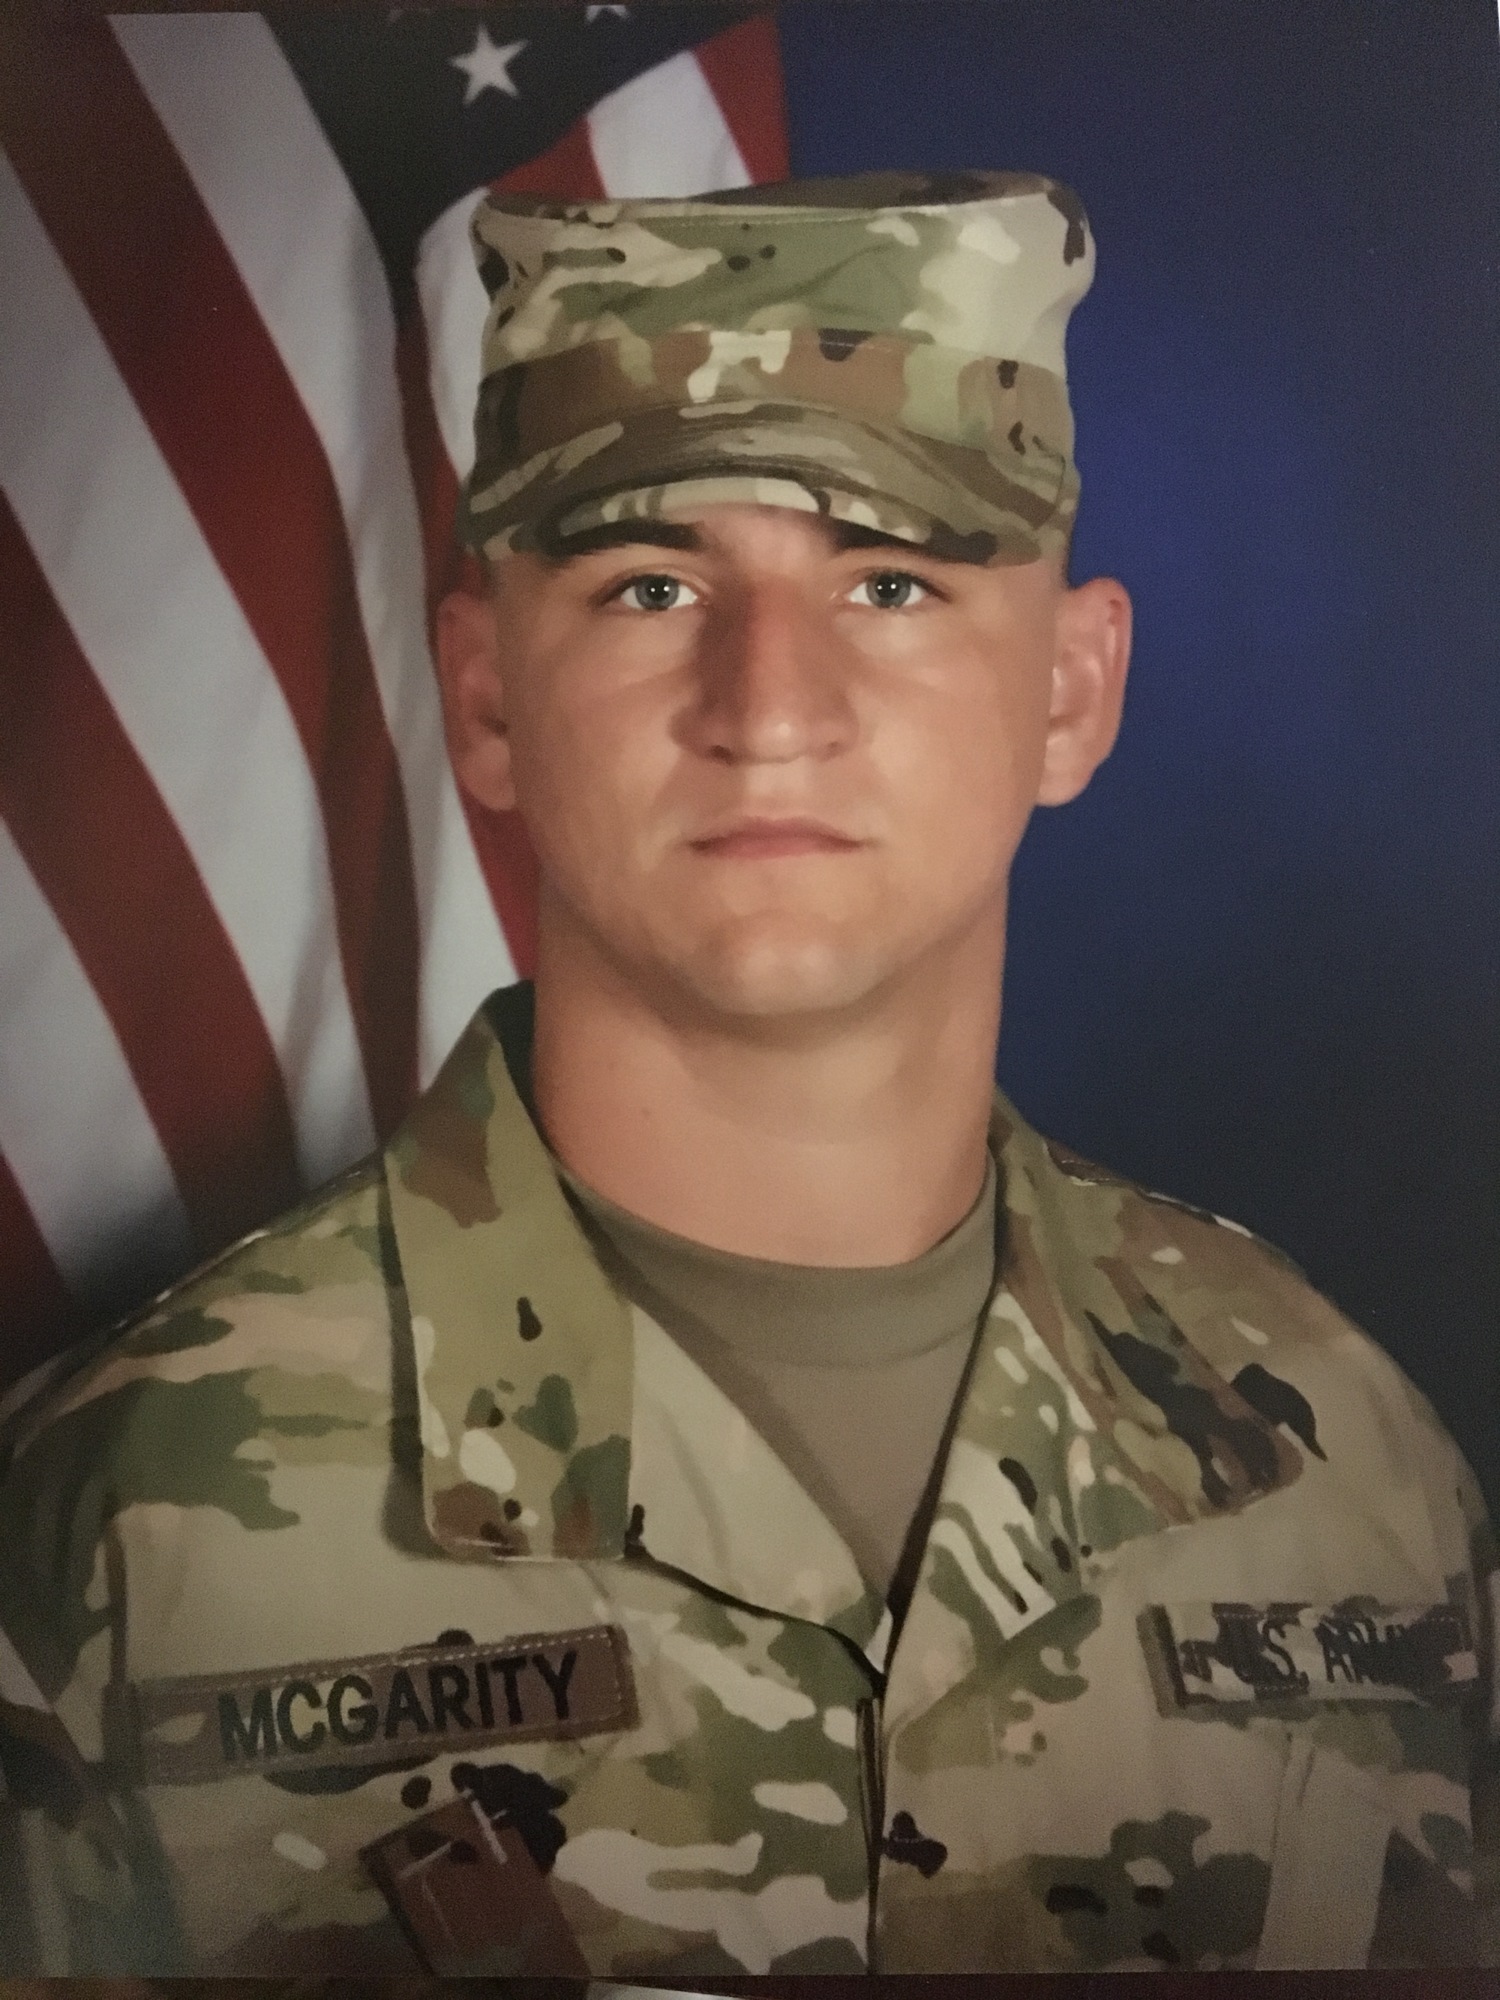 Pvt. Eddie McGarity graduated from basic training by the U.S. Army on Oct. 27 at Fort Sill in Oklahoma. Photo courtesy of Ed and Robbin McGarity